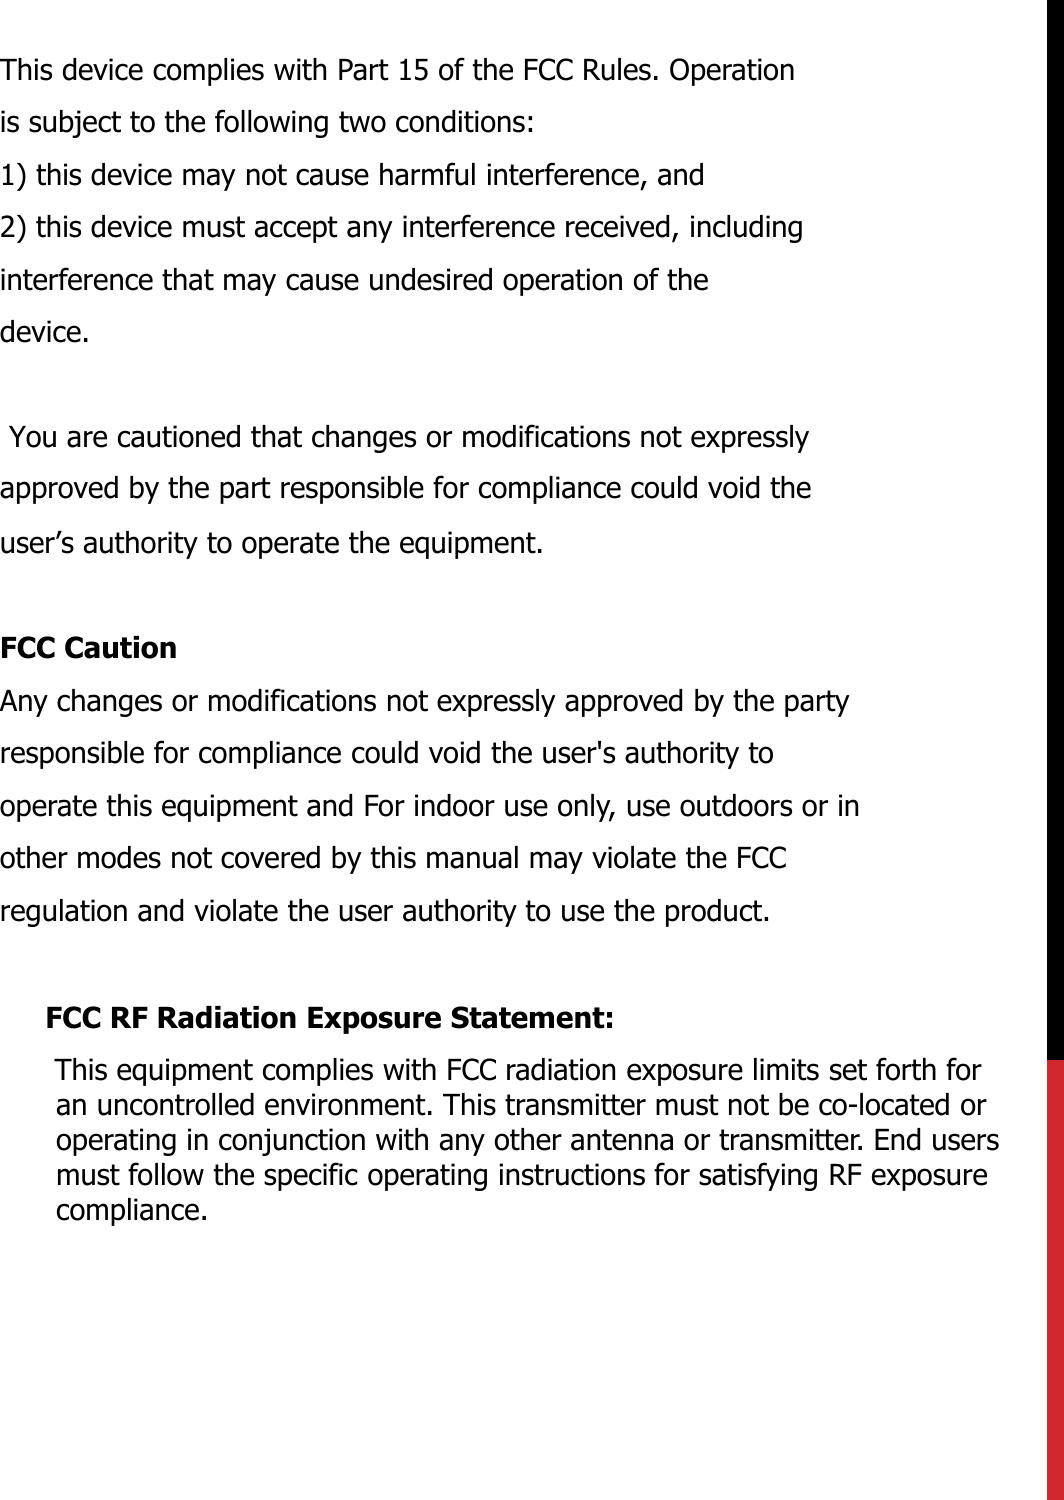 This device complies with Part 15 of the FCC Rules. Operationis subject to the following two conditions:1) this device may not cause harmful interference, and2) this device must accept any interference received, includinginterference that may cause undesired operation of thedevice.  You are cautioned that changes or modifications not expressly  approved by the part responsible for compliance could void the user’s authority to operate the equipment.FCC CautionAny changes or modifications not expressly approved by the partyresponsible for compliance could void the user&apos;s authority tooperate this equipment and For indoor use only, use outdoors or inother modes not covered by this manual may violate the FCCregulation and violate the user authority to use the product.FCC RF Radiation Exposure Statement:This equipment complies with FCC radiation exposure limits set forth for an uncontrolled environment. This transmitter must not be co-located or operating in conjunction with any other antenna or transmitter. End users must follow the specific operating instructions for satisfying RF exposure compliance.